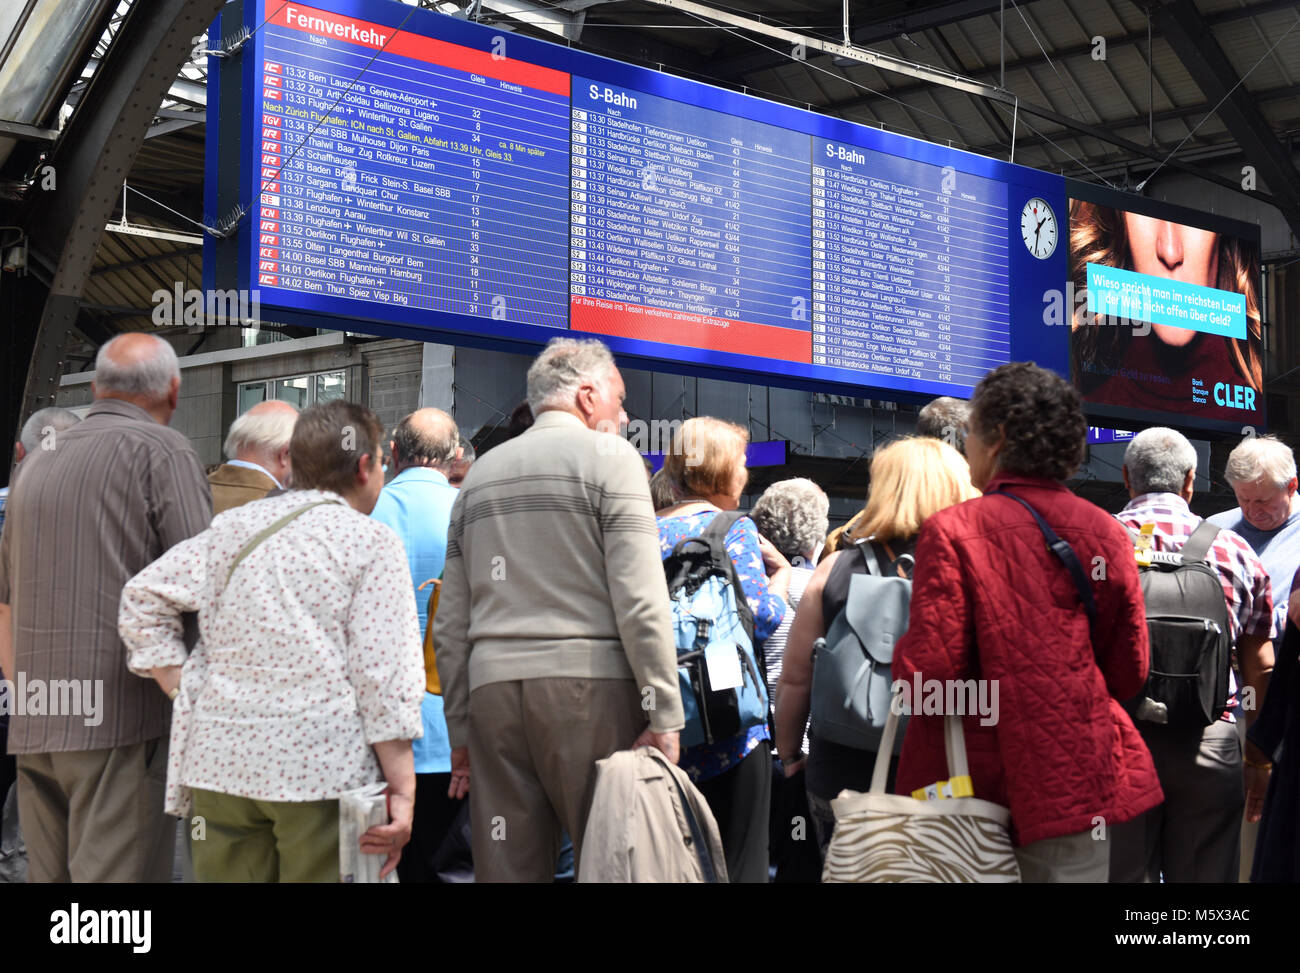 Zurich, Switzerland -  June 03, 2017: People on the Zurich main railway station and electronic board with a train schedule. Zurich central train station (Zurich Hauptbahnhof). Stock Photo